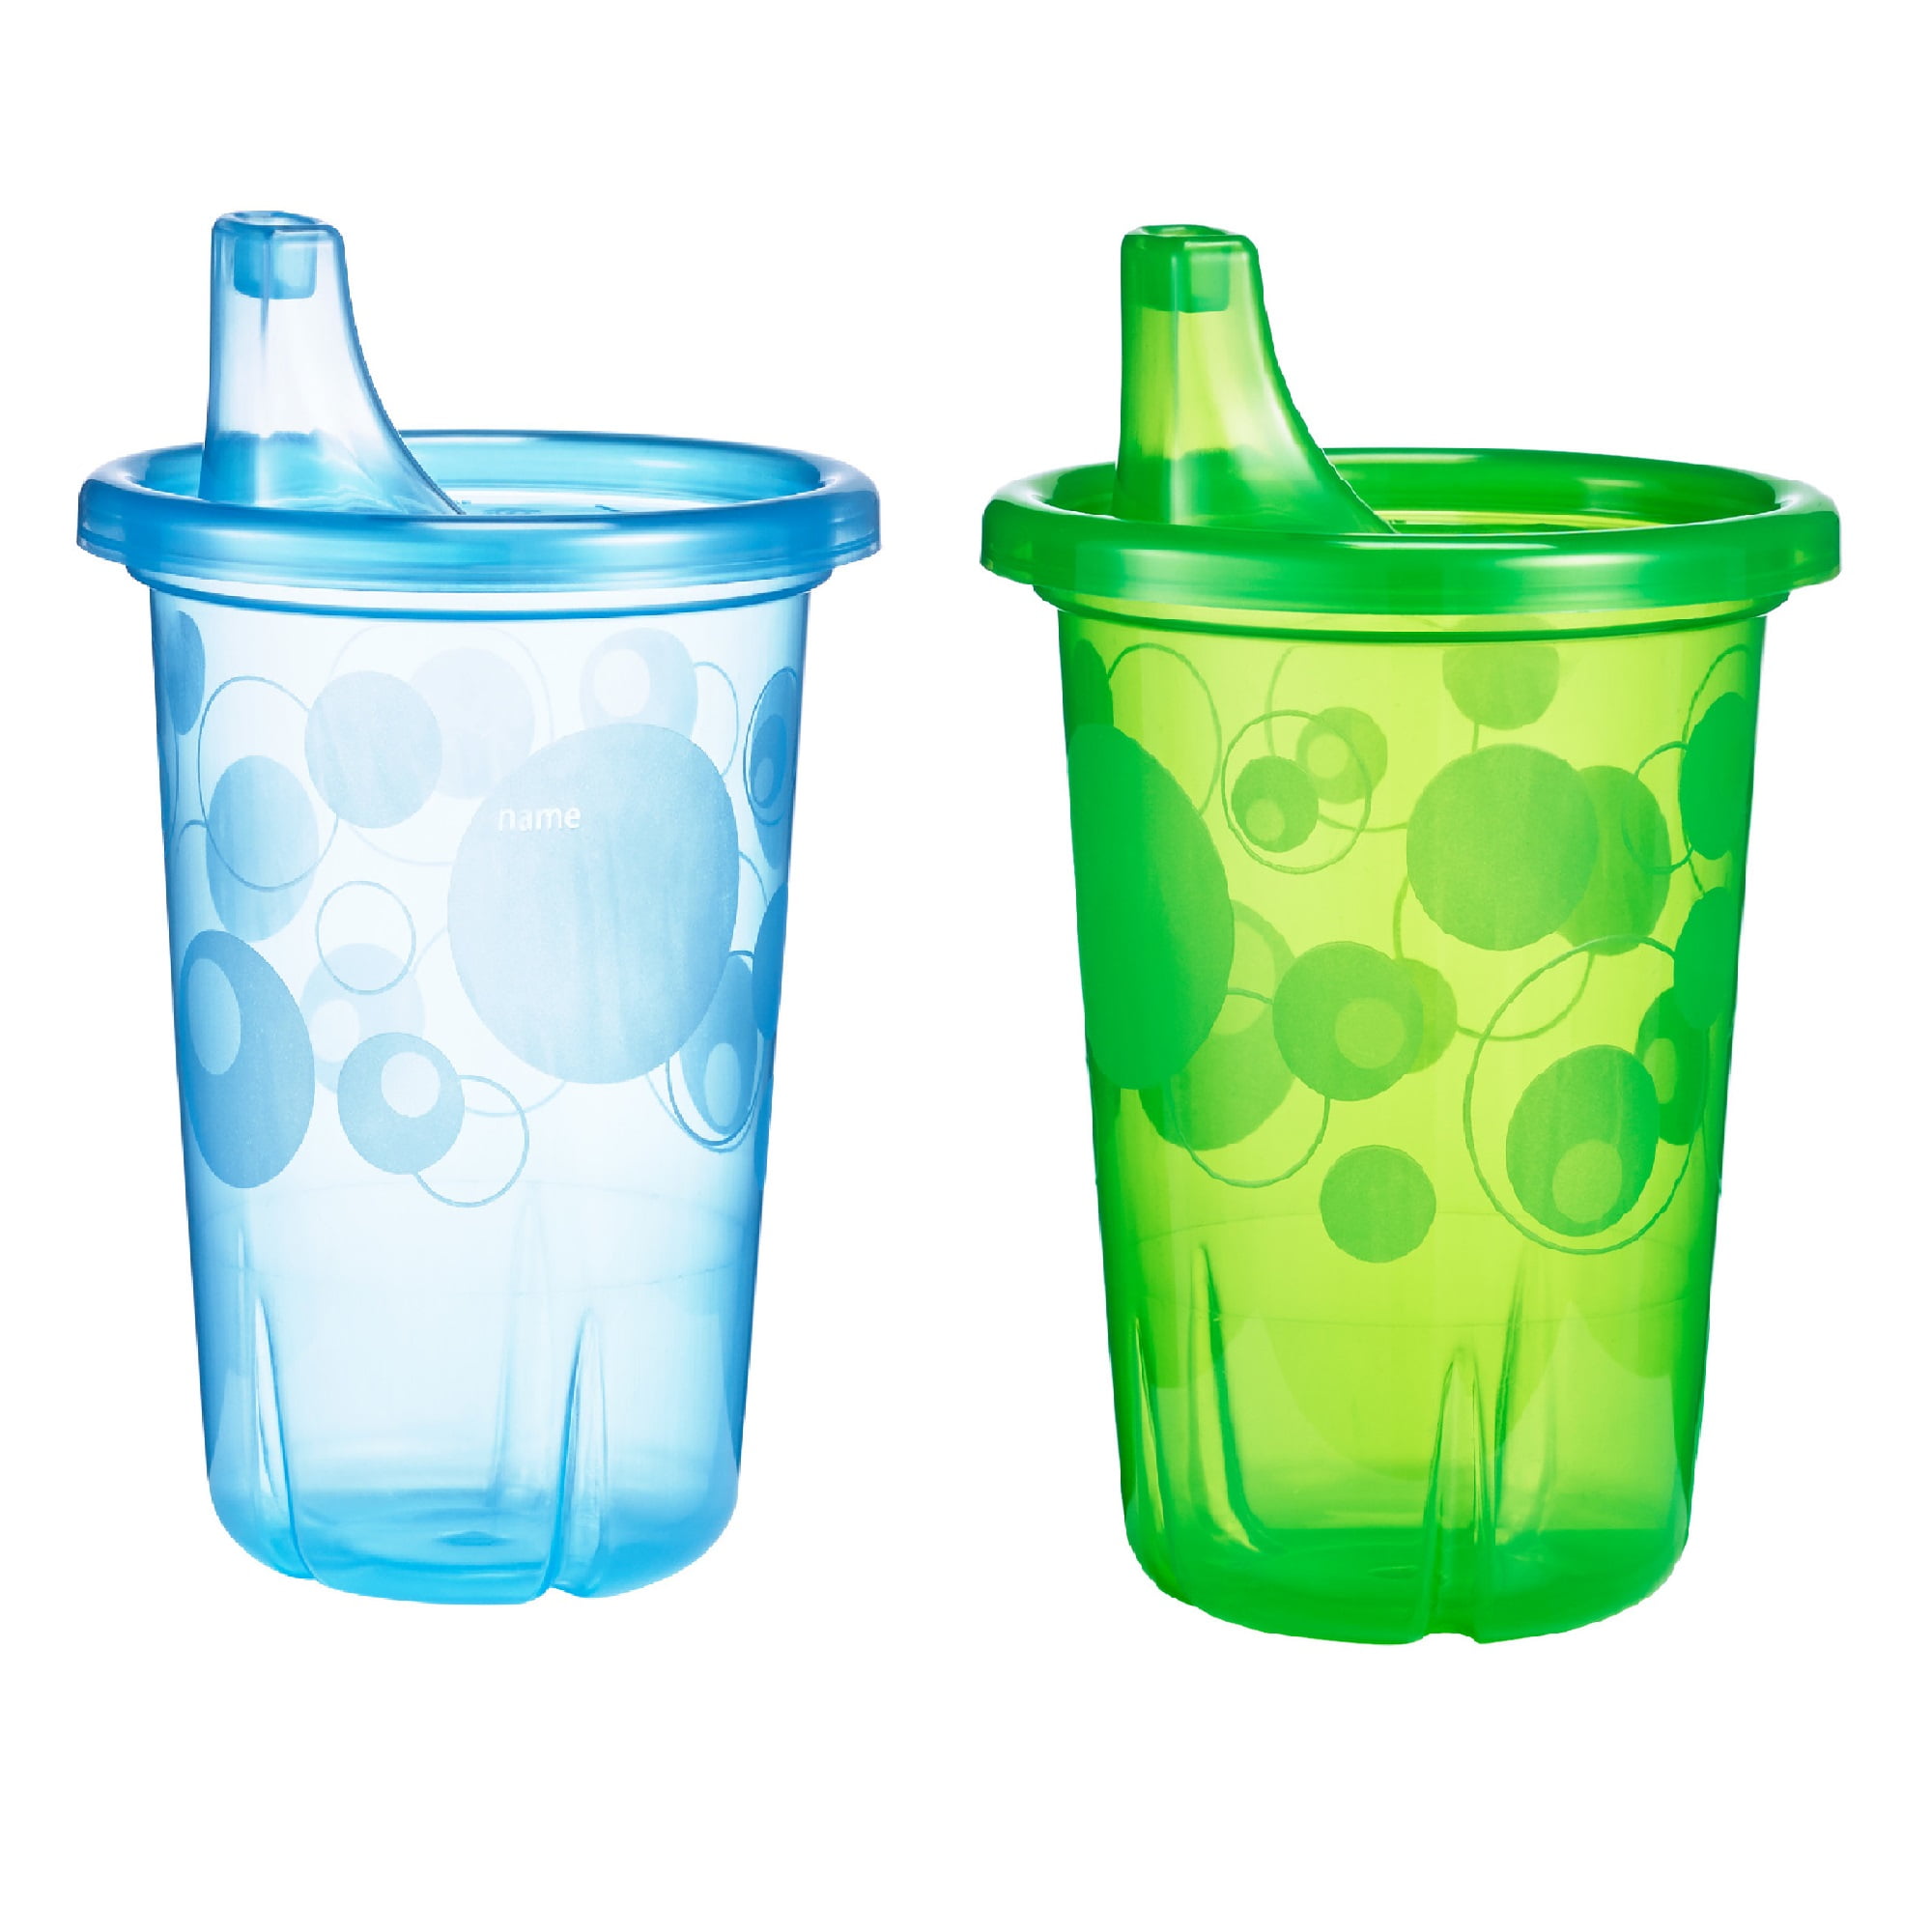 John Deere Take and Toss Sippy Cup Free Shipping 3 Pack New 